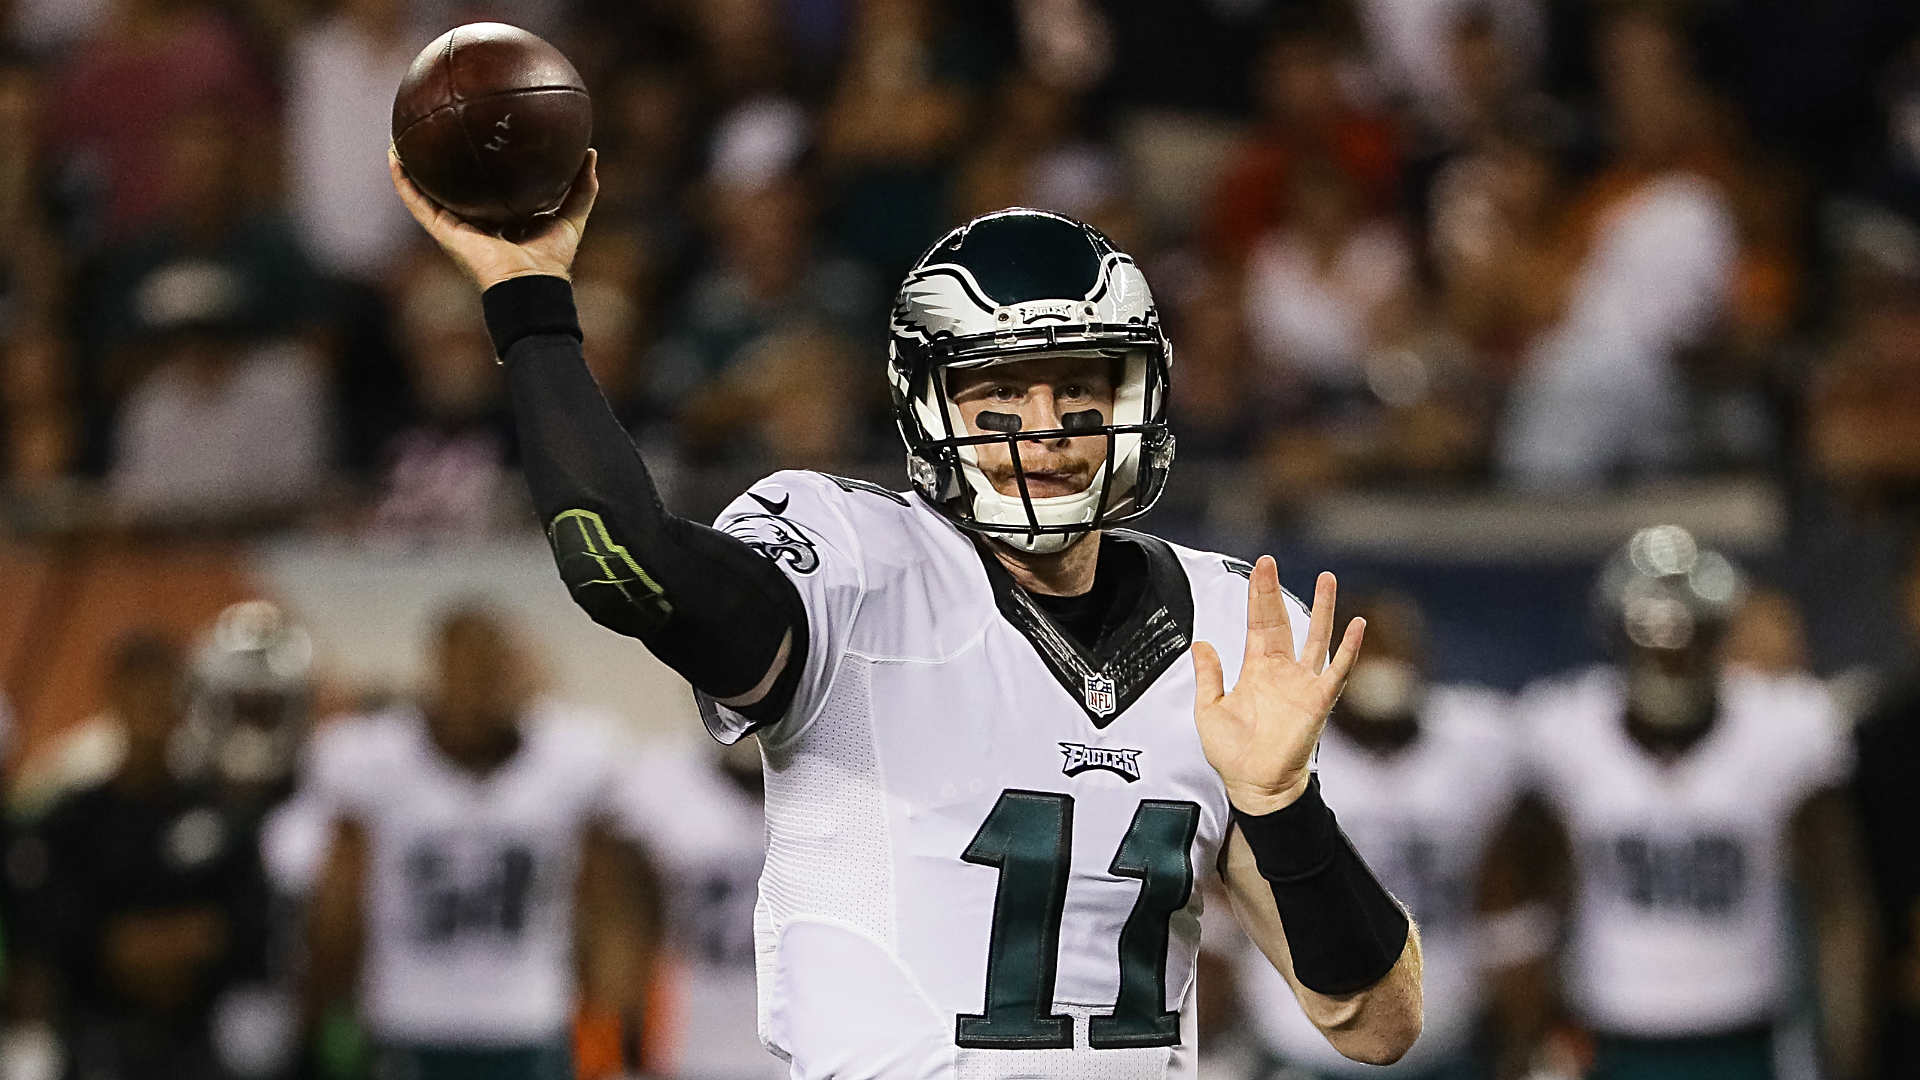 Carson Wentz, Now 2 0 As A Pro, Following In Really Big Footsteps